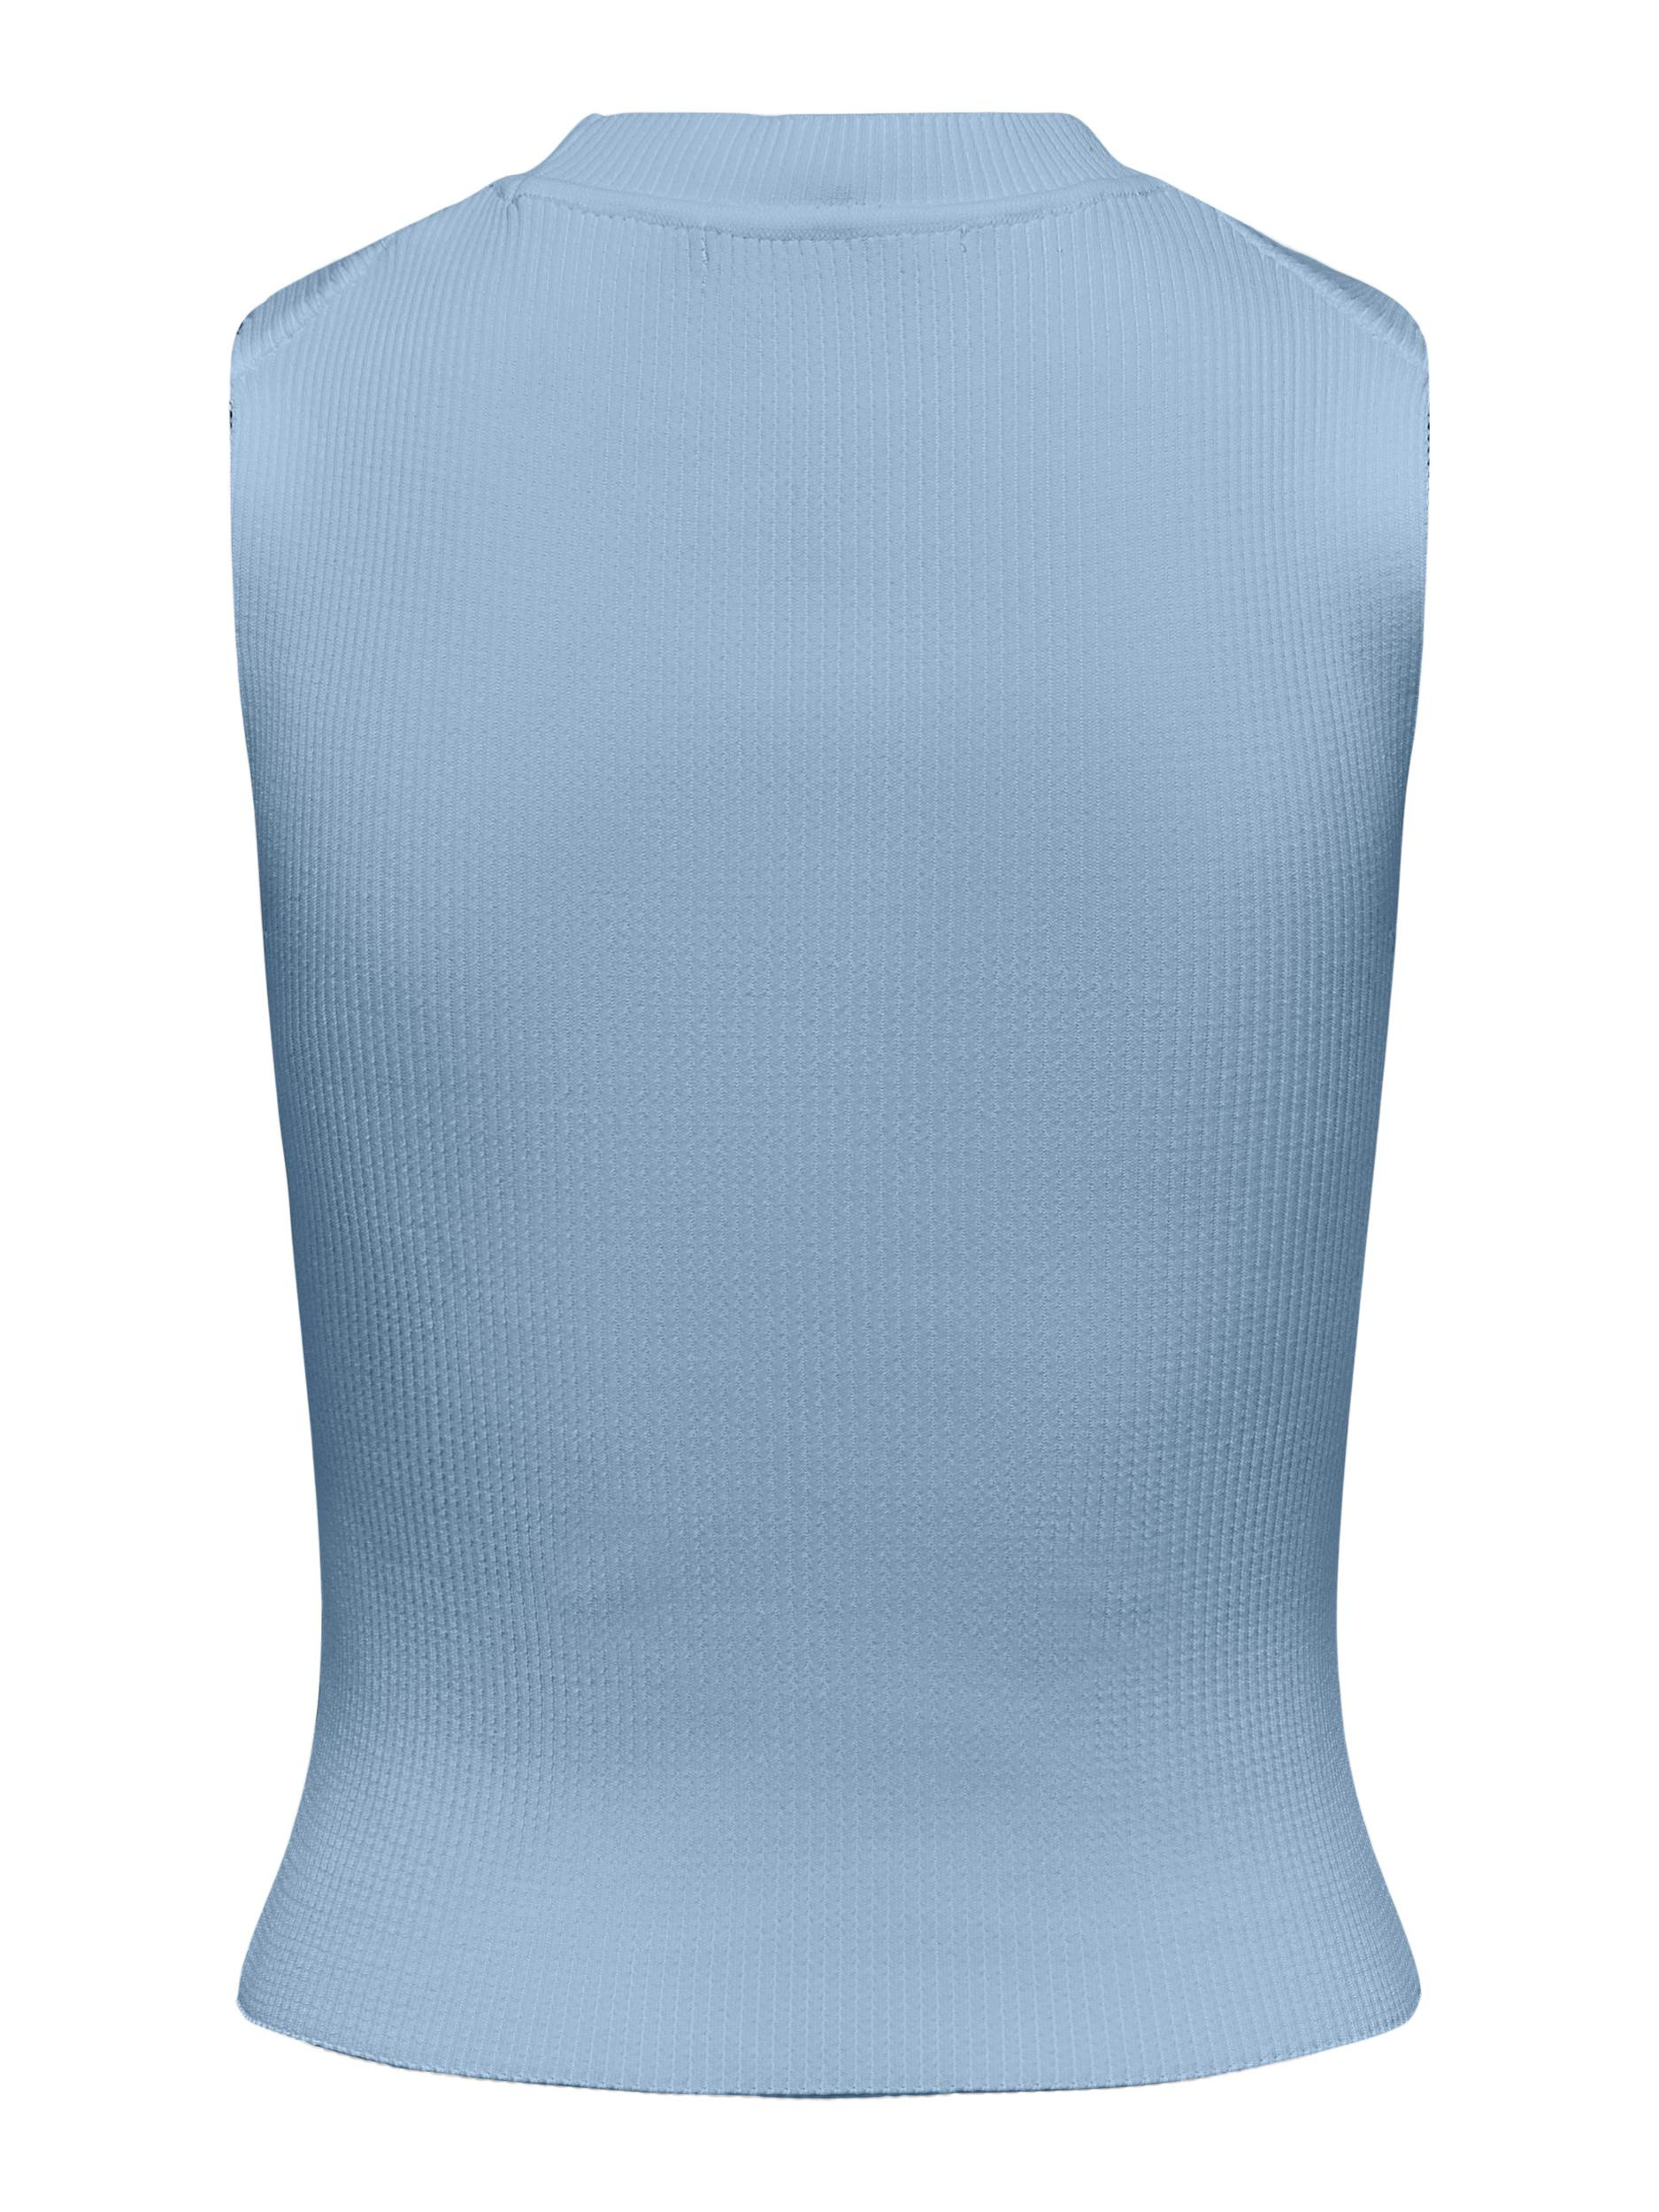 Only - Knitted top, Light Blue, large image number 1